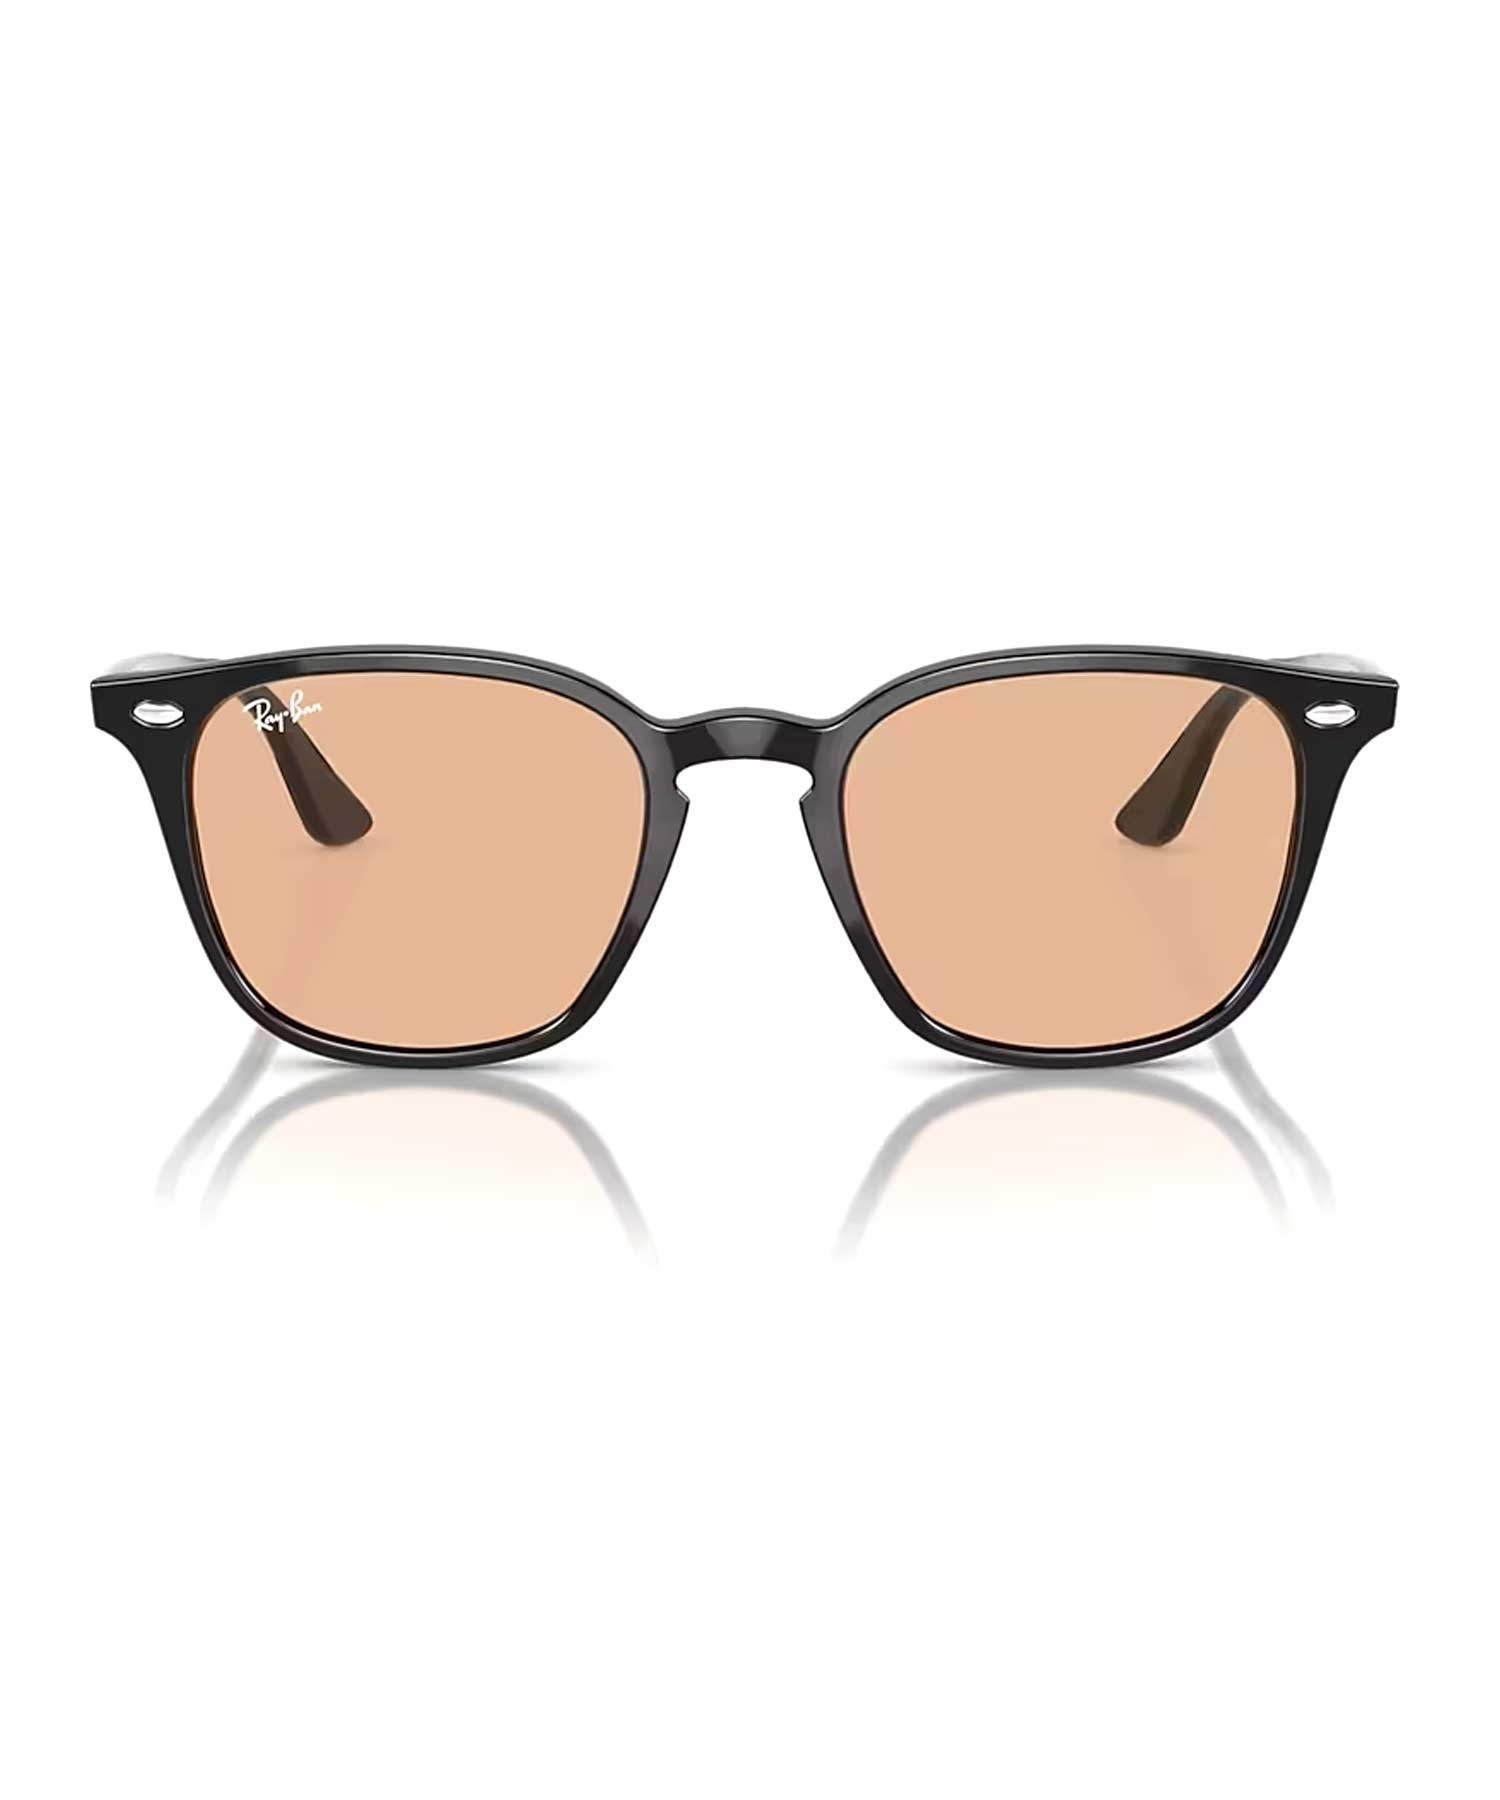 Ray-Ban/レイバン サングラス HIGHSTREET2 WASHED LENSES 0RB4258F(60193-52cm)